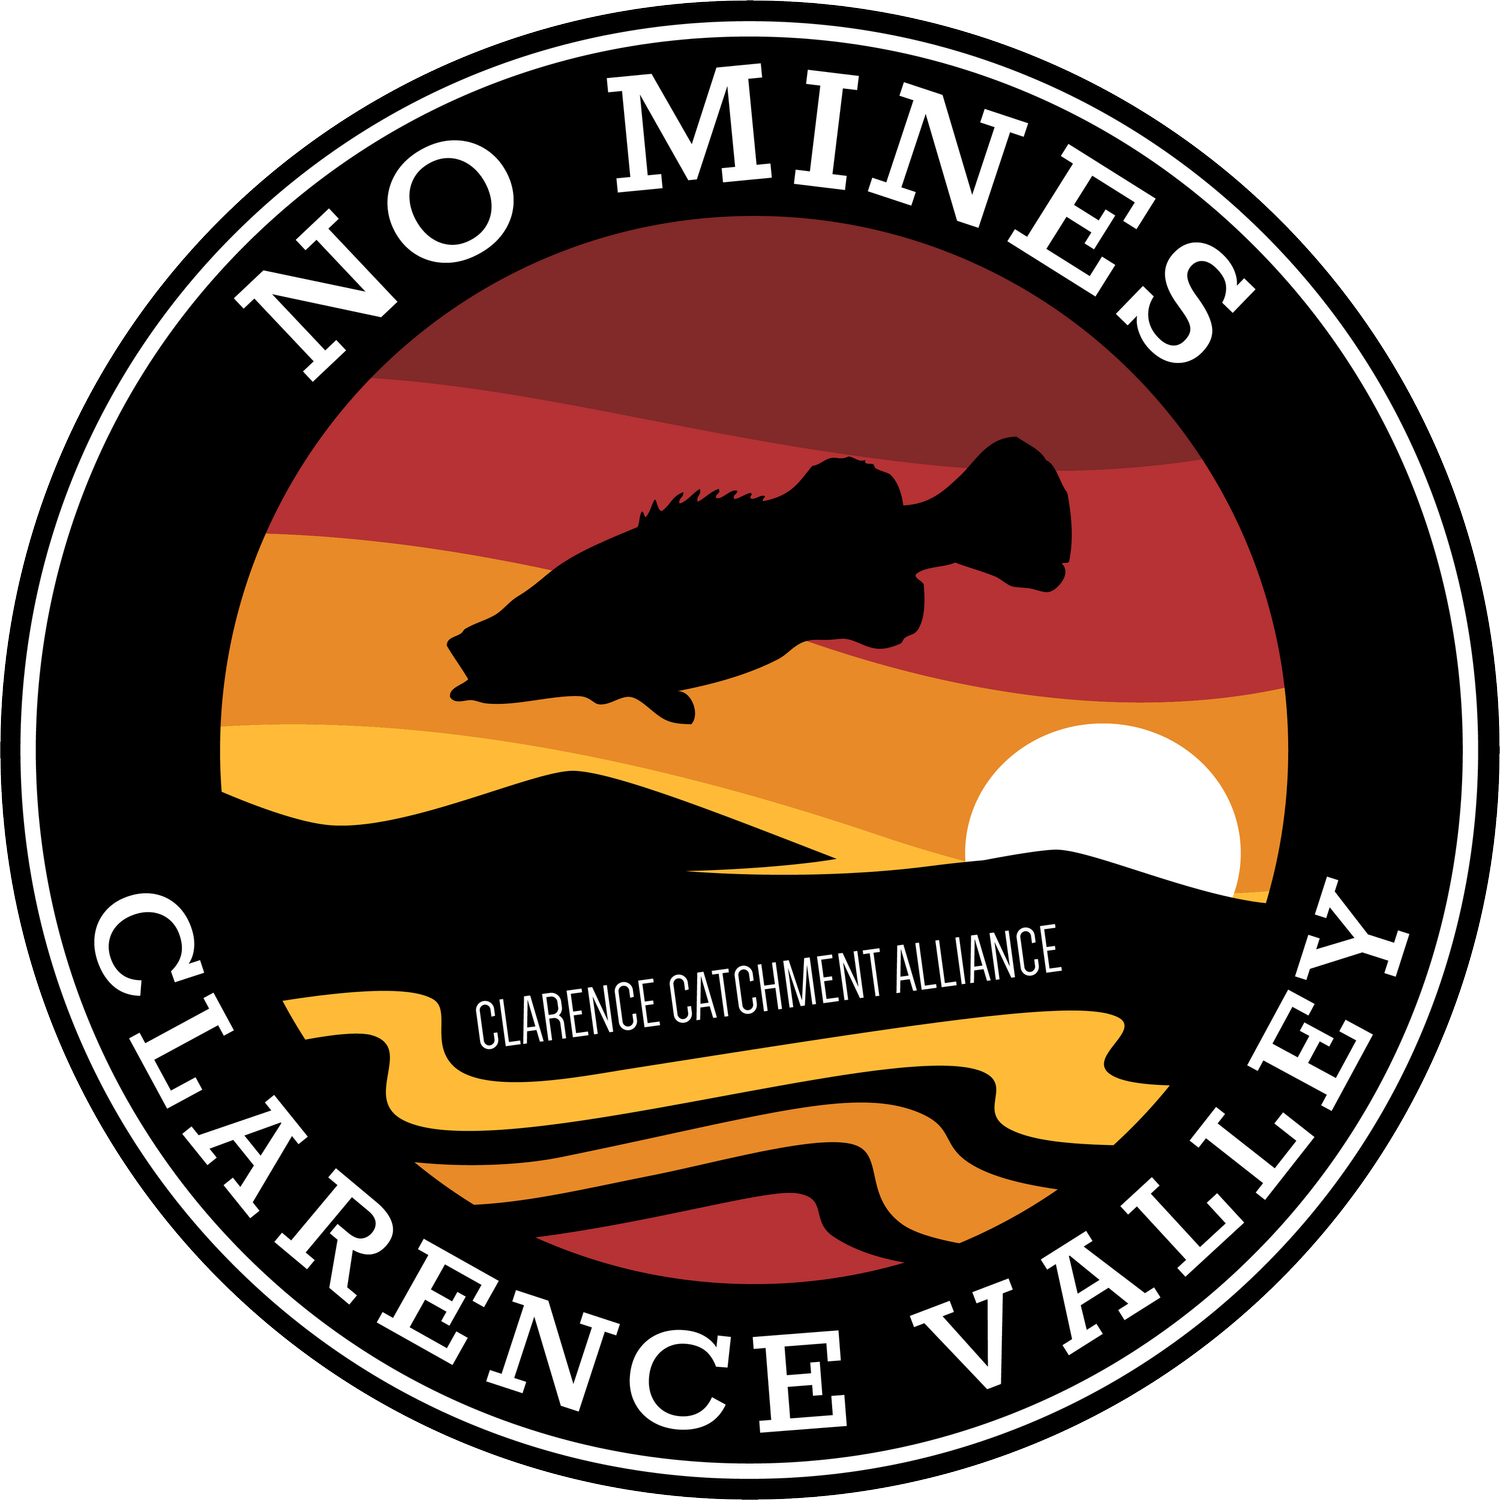 CLARENCE CATCHMENT ALLIANCE